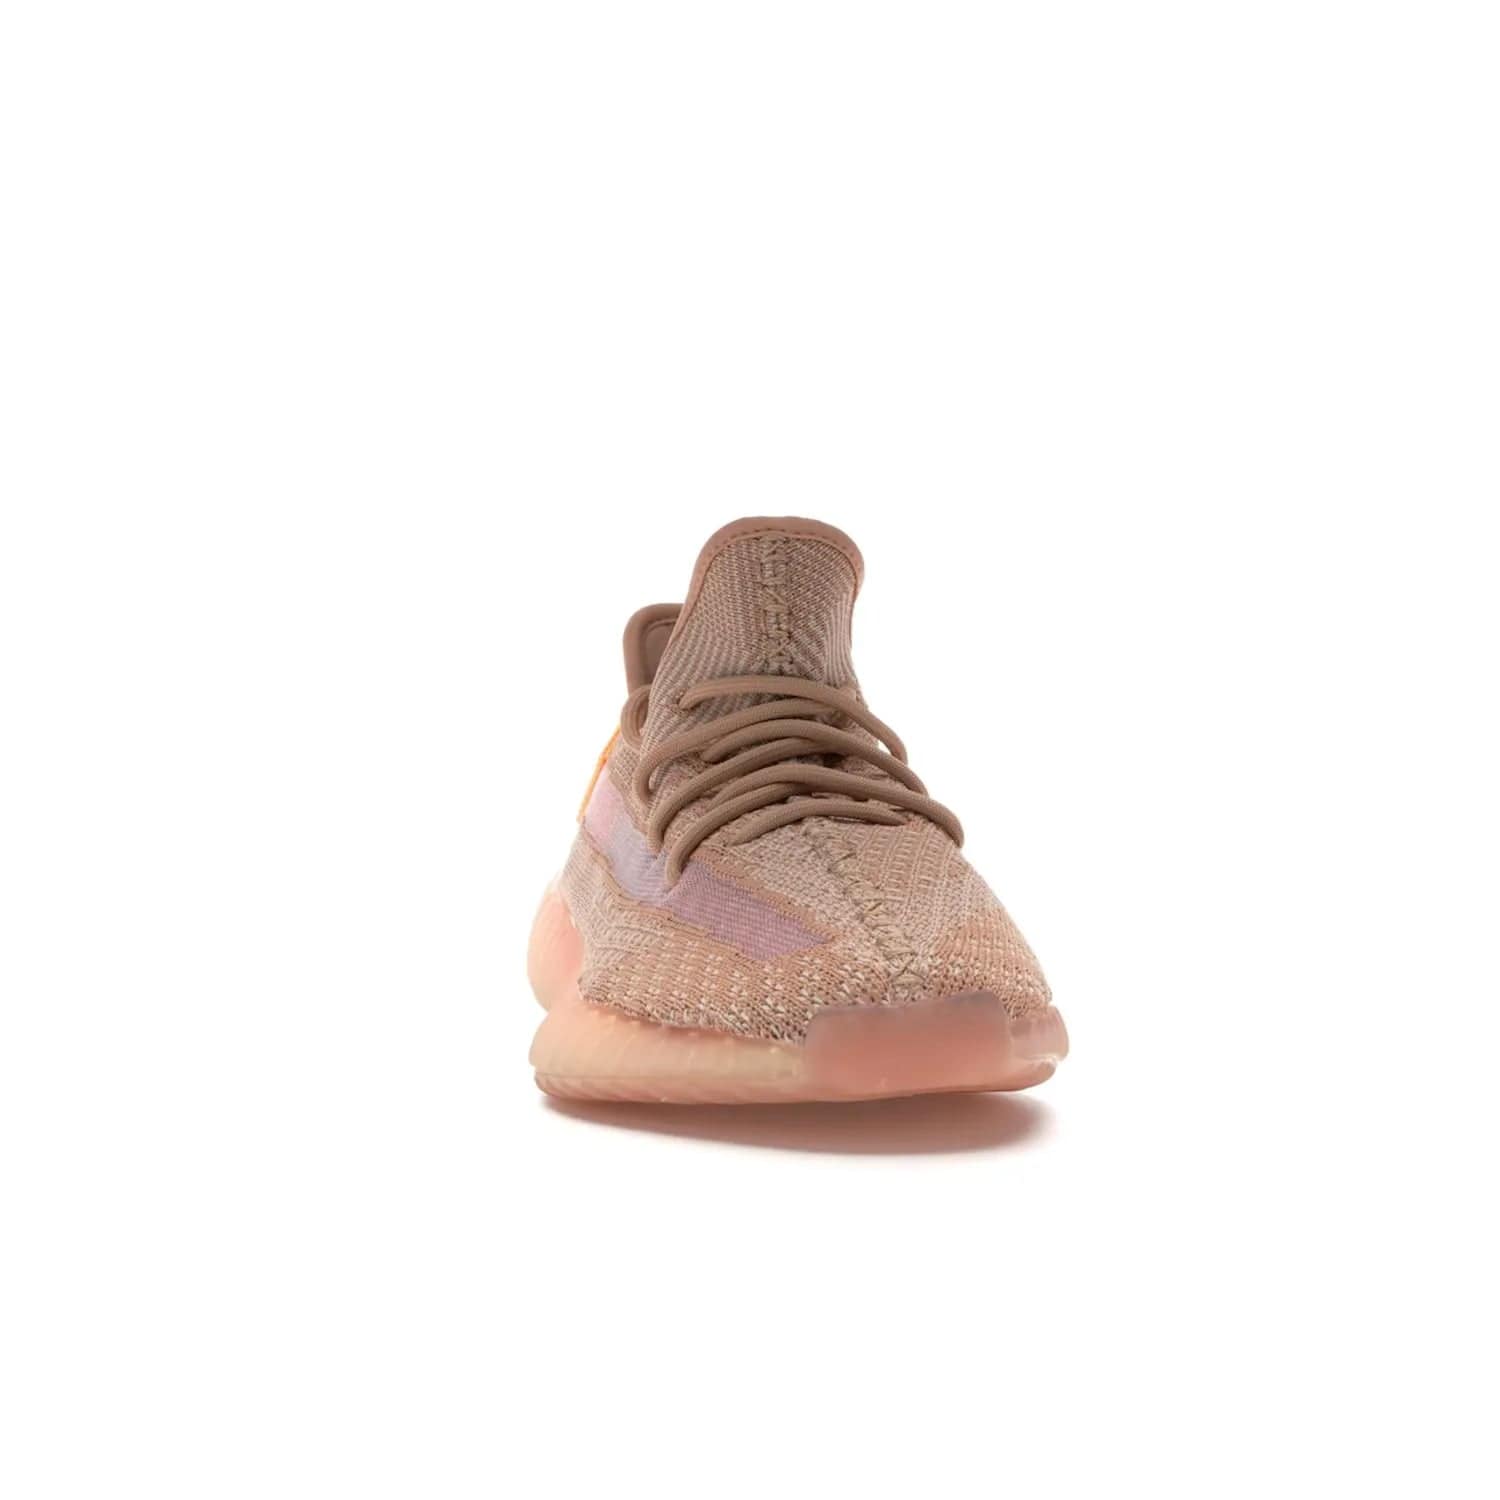 adidas Yeezy Boost 350 V2 Clay - Image 9 - Only at www.BallersClubKickz.com - The adidas Yeezy Boost 350 V2 Clay - style and swag in one shoe. Orange accents, clay midsole and sole. Get yours today!